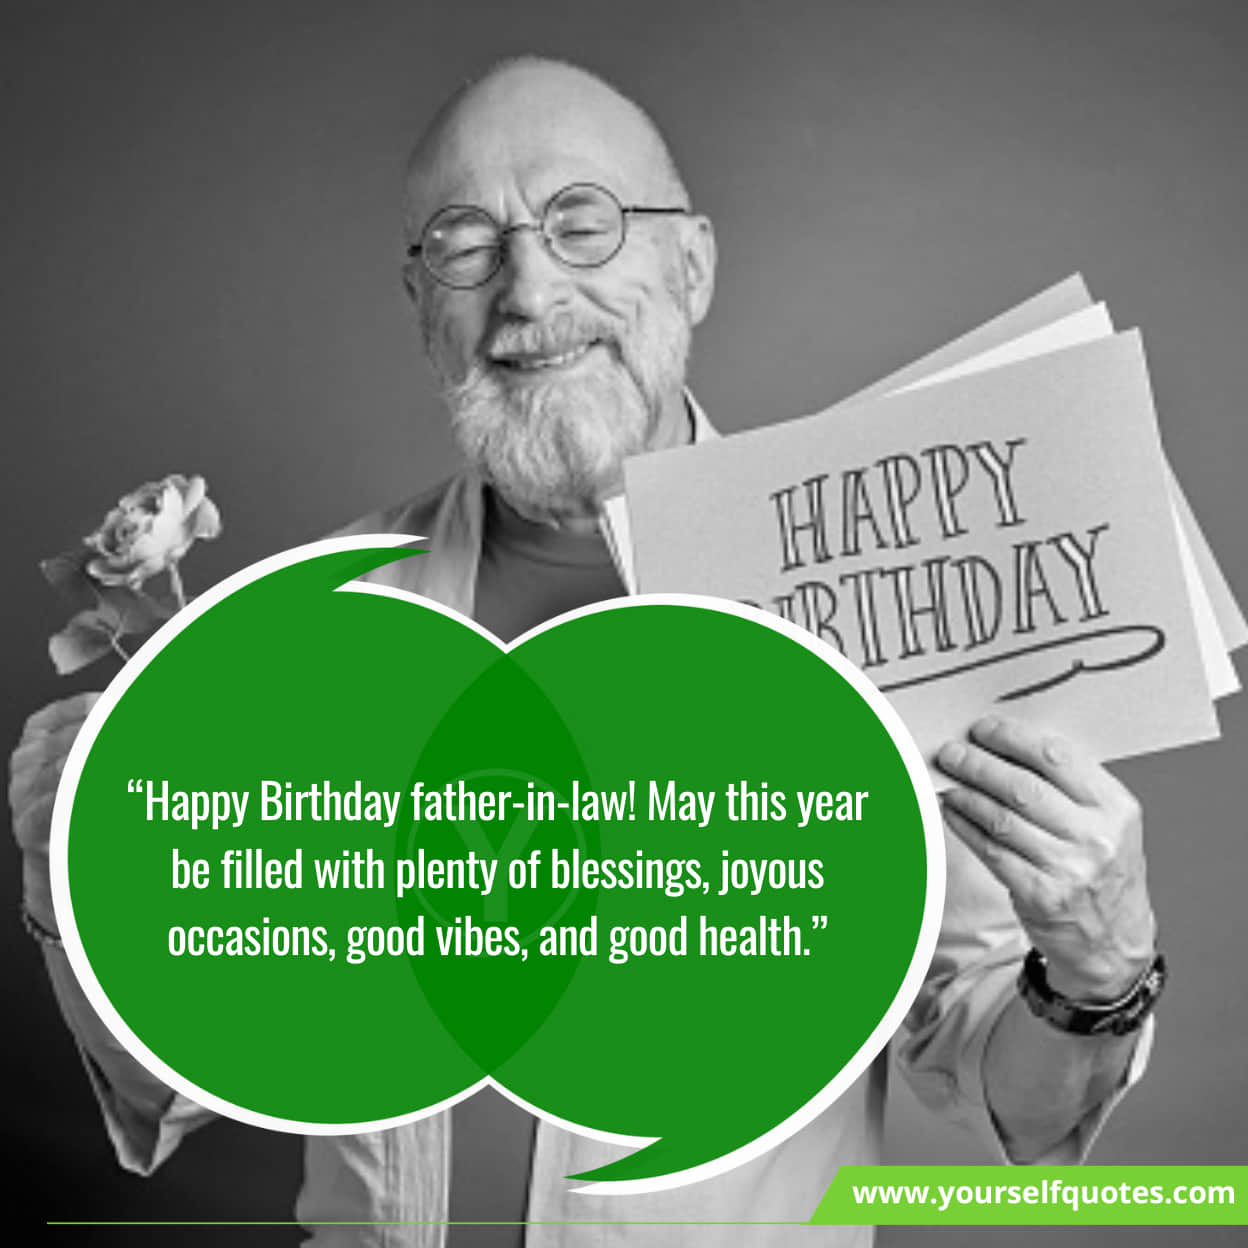 Inspiring Birthday Wishes For Father-in-law To Stay Happy